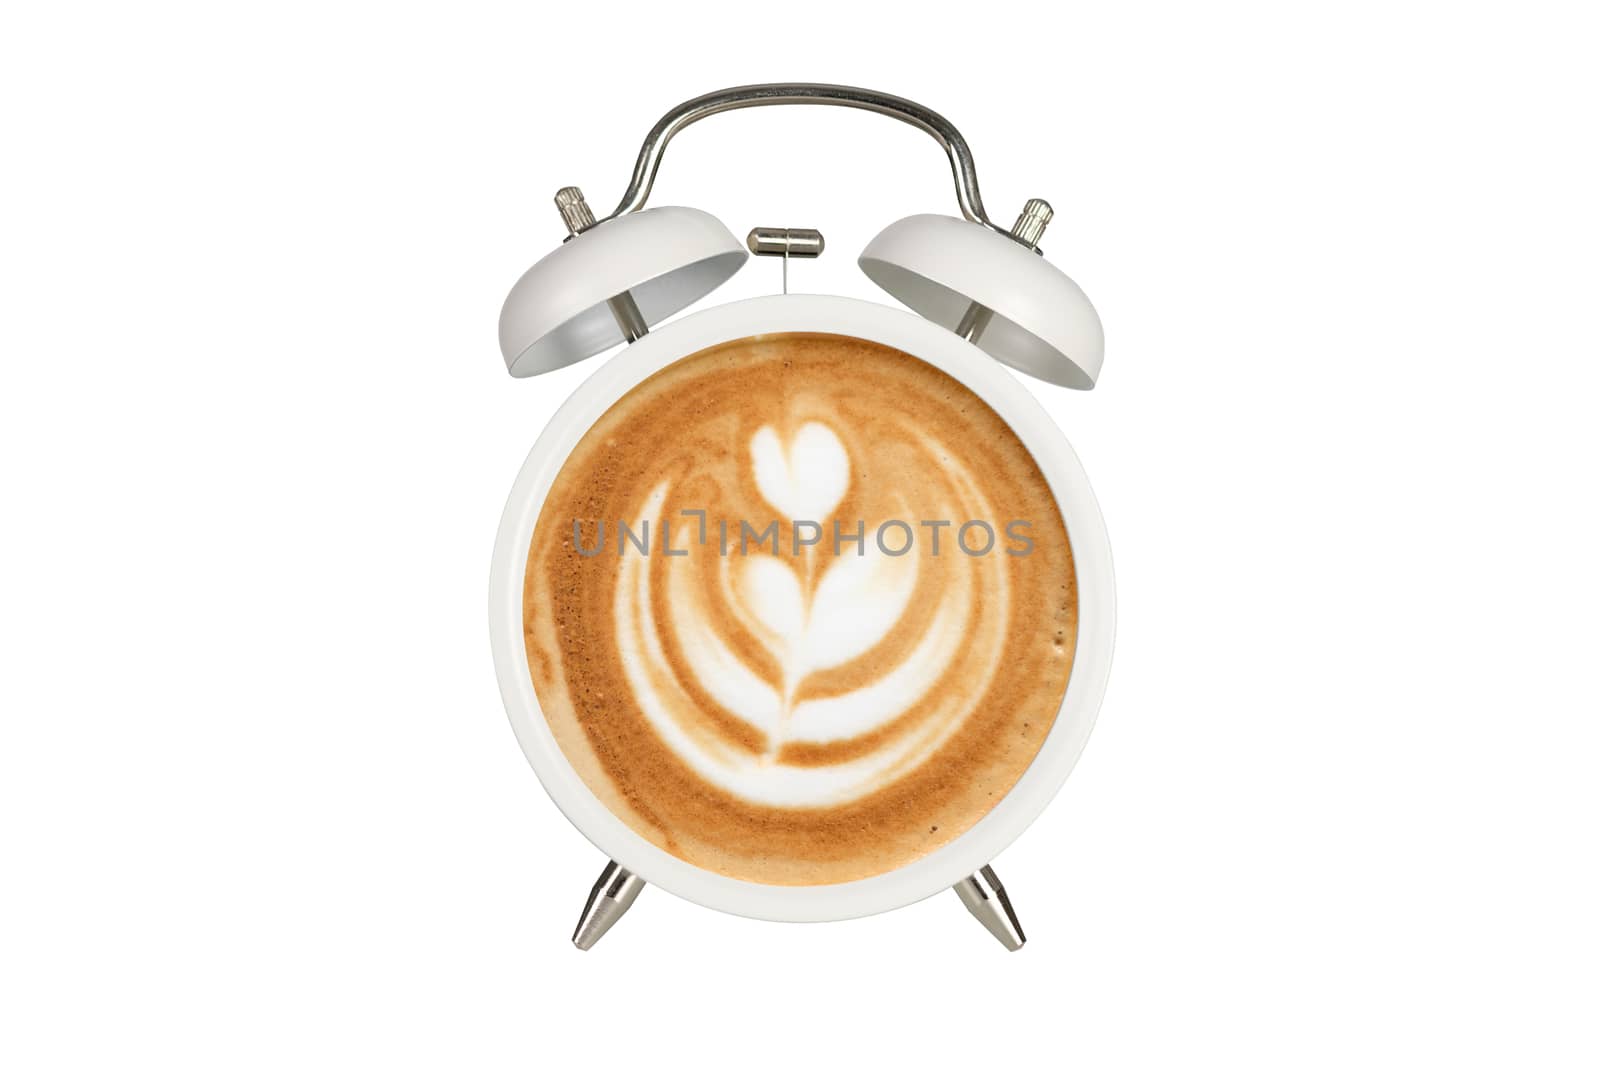 Hot coffee with frothy foam in white alarmclock design is Coffee Time Concept